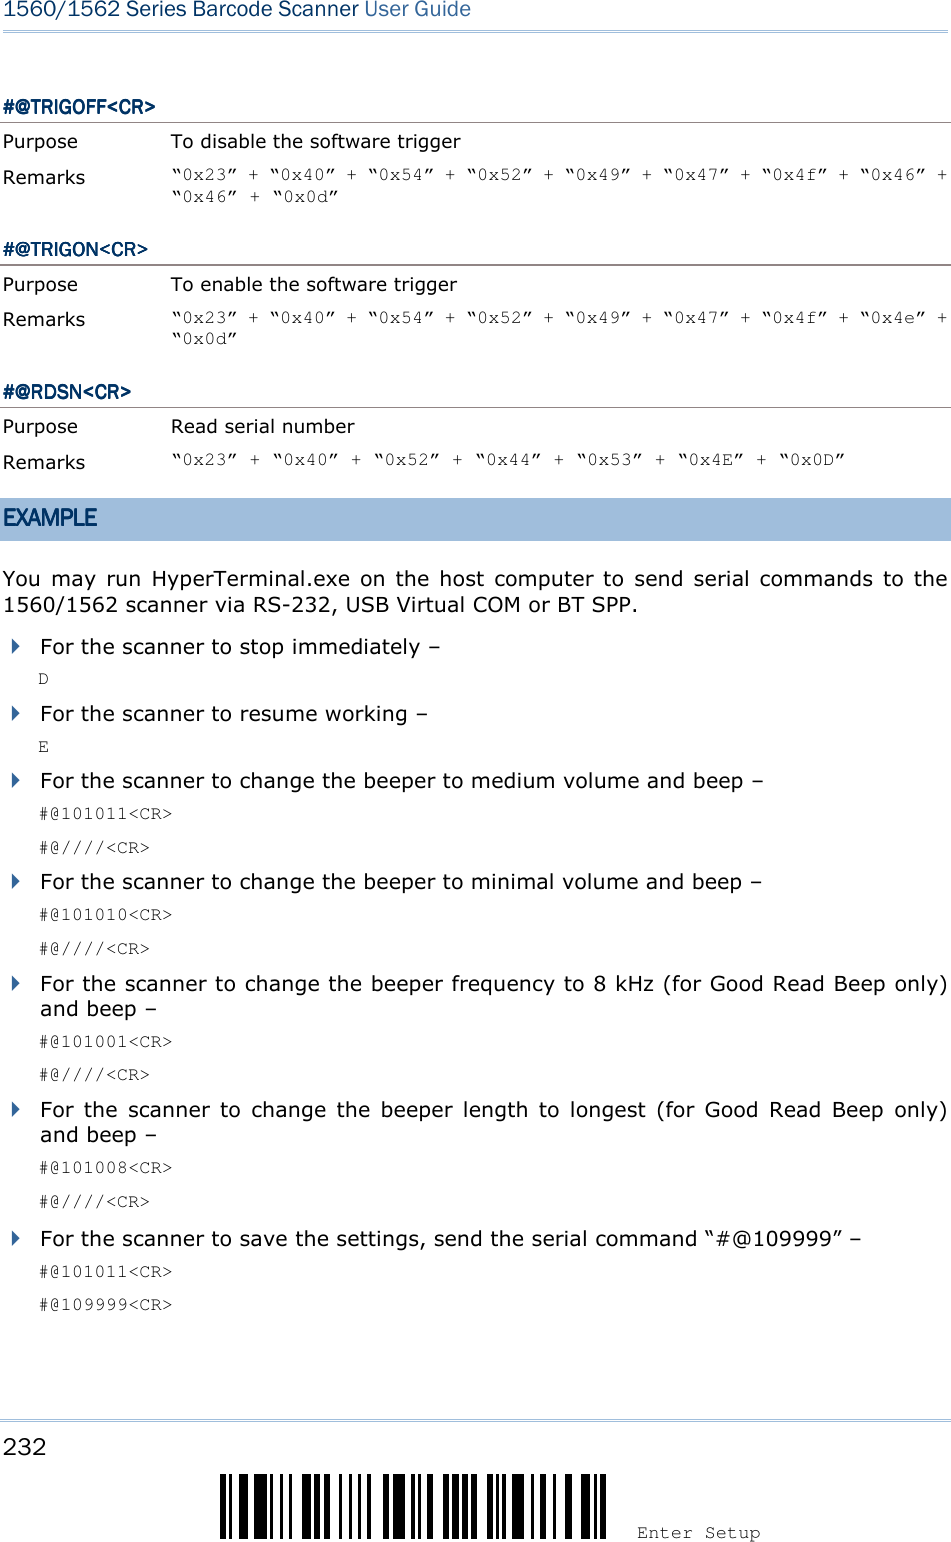 232 Enter Setup 1560/1562 Series Barcode Scanner User Guide  #@TRIGOFF&lt;CR&gt;#@TRIGOFF&lt;CR&gt;#@TRIGOFF&lt;CR&gt;#@TRIGOFF&lt;CR&gt;    Purpose  To disable the software trigger Remarks  “0x23” + “0x40” + “0x54” + “0x52” + “0x49” + “0x47” + “0x4f” + “0x46” + “0x46” + “0x0d” #@TRIGON&lt;CR&gt;#@TRIGON&lt;CR&gt;#@TRIGON&lt;CR&gt;#@TRIGON&lt;CR&gt;    Purpose  To enable the software trigger Remarks  “0x23” + “0x40” + “0x54” + “0x52” + “0x49” + “0x47” + “0x4f” + “0x4e” + “0x0d” #@#@#@#@RDSNRDSNRDSNRDSN&lt;CR&gt;&lt;CR&gt;&lt;CR&gt;&lt;CR&gt;    Purpose  Read serial number Remarks  “0x23” + “0x40” + “0x52” + “0x44” + “0x53” + “0x4E” + “0x0D” EXAMPLEEXAMPLEEXAMPLEEXAMPLE    You may  run  HyperTerminal.exe  on  the  host  computer to  send  serial commands to the 1560/1562 scanner via RS-232, USB Virtual COM or BT SPP.  For the scanner to stop immediately –   D  For the scanner to resume working –   E  For the scanner to change the beeper to medium volume and beep –   #@101011&lt;CR&gt; #@////&lt;CR&gt;  For the scanner to change the beeper to minimal volume and beep –   #@101010&lt;CR&gt; #@////&lt;CR&gt;  For the scanner to change the beeper frequency to 8 kHz (for Good Read Beep only) and beep –   #@101001&lt;CR&gt; #@////&lt;CR&gt;  For  the  scanner  to  change  the  beeper  length  to  longest  (for  Good  Read  Beep  only) and beep –   #@101008&lt;CR&gt; #@////&lt;CR&gt;   For the scanner to save the settings, send the serial command “#@109999” –   #@101011&lt;CR&gt; #@109999&lt;CR&gt;  